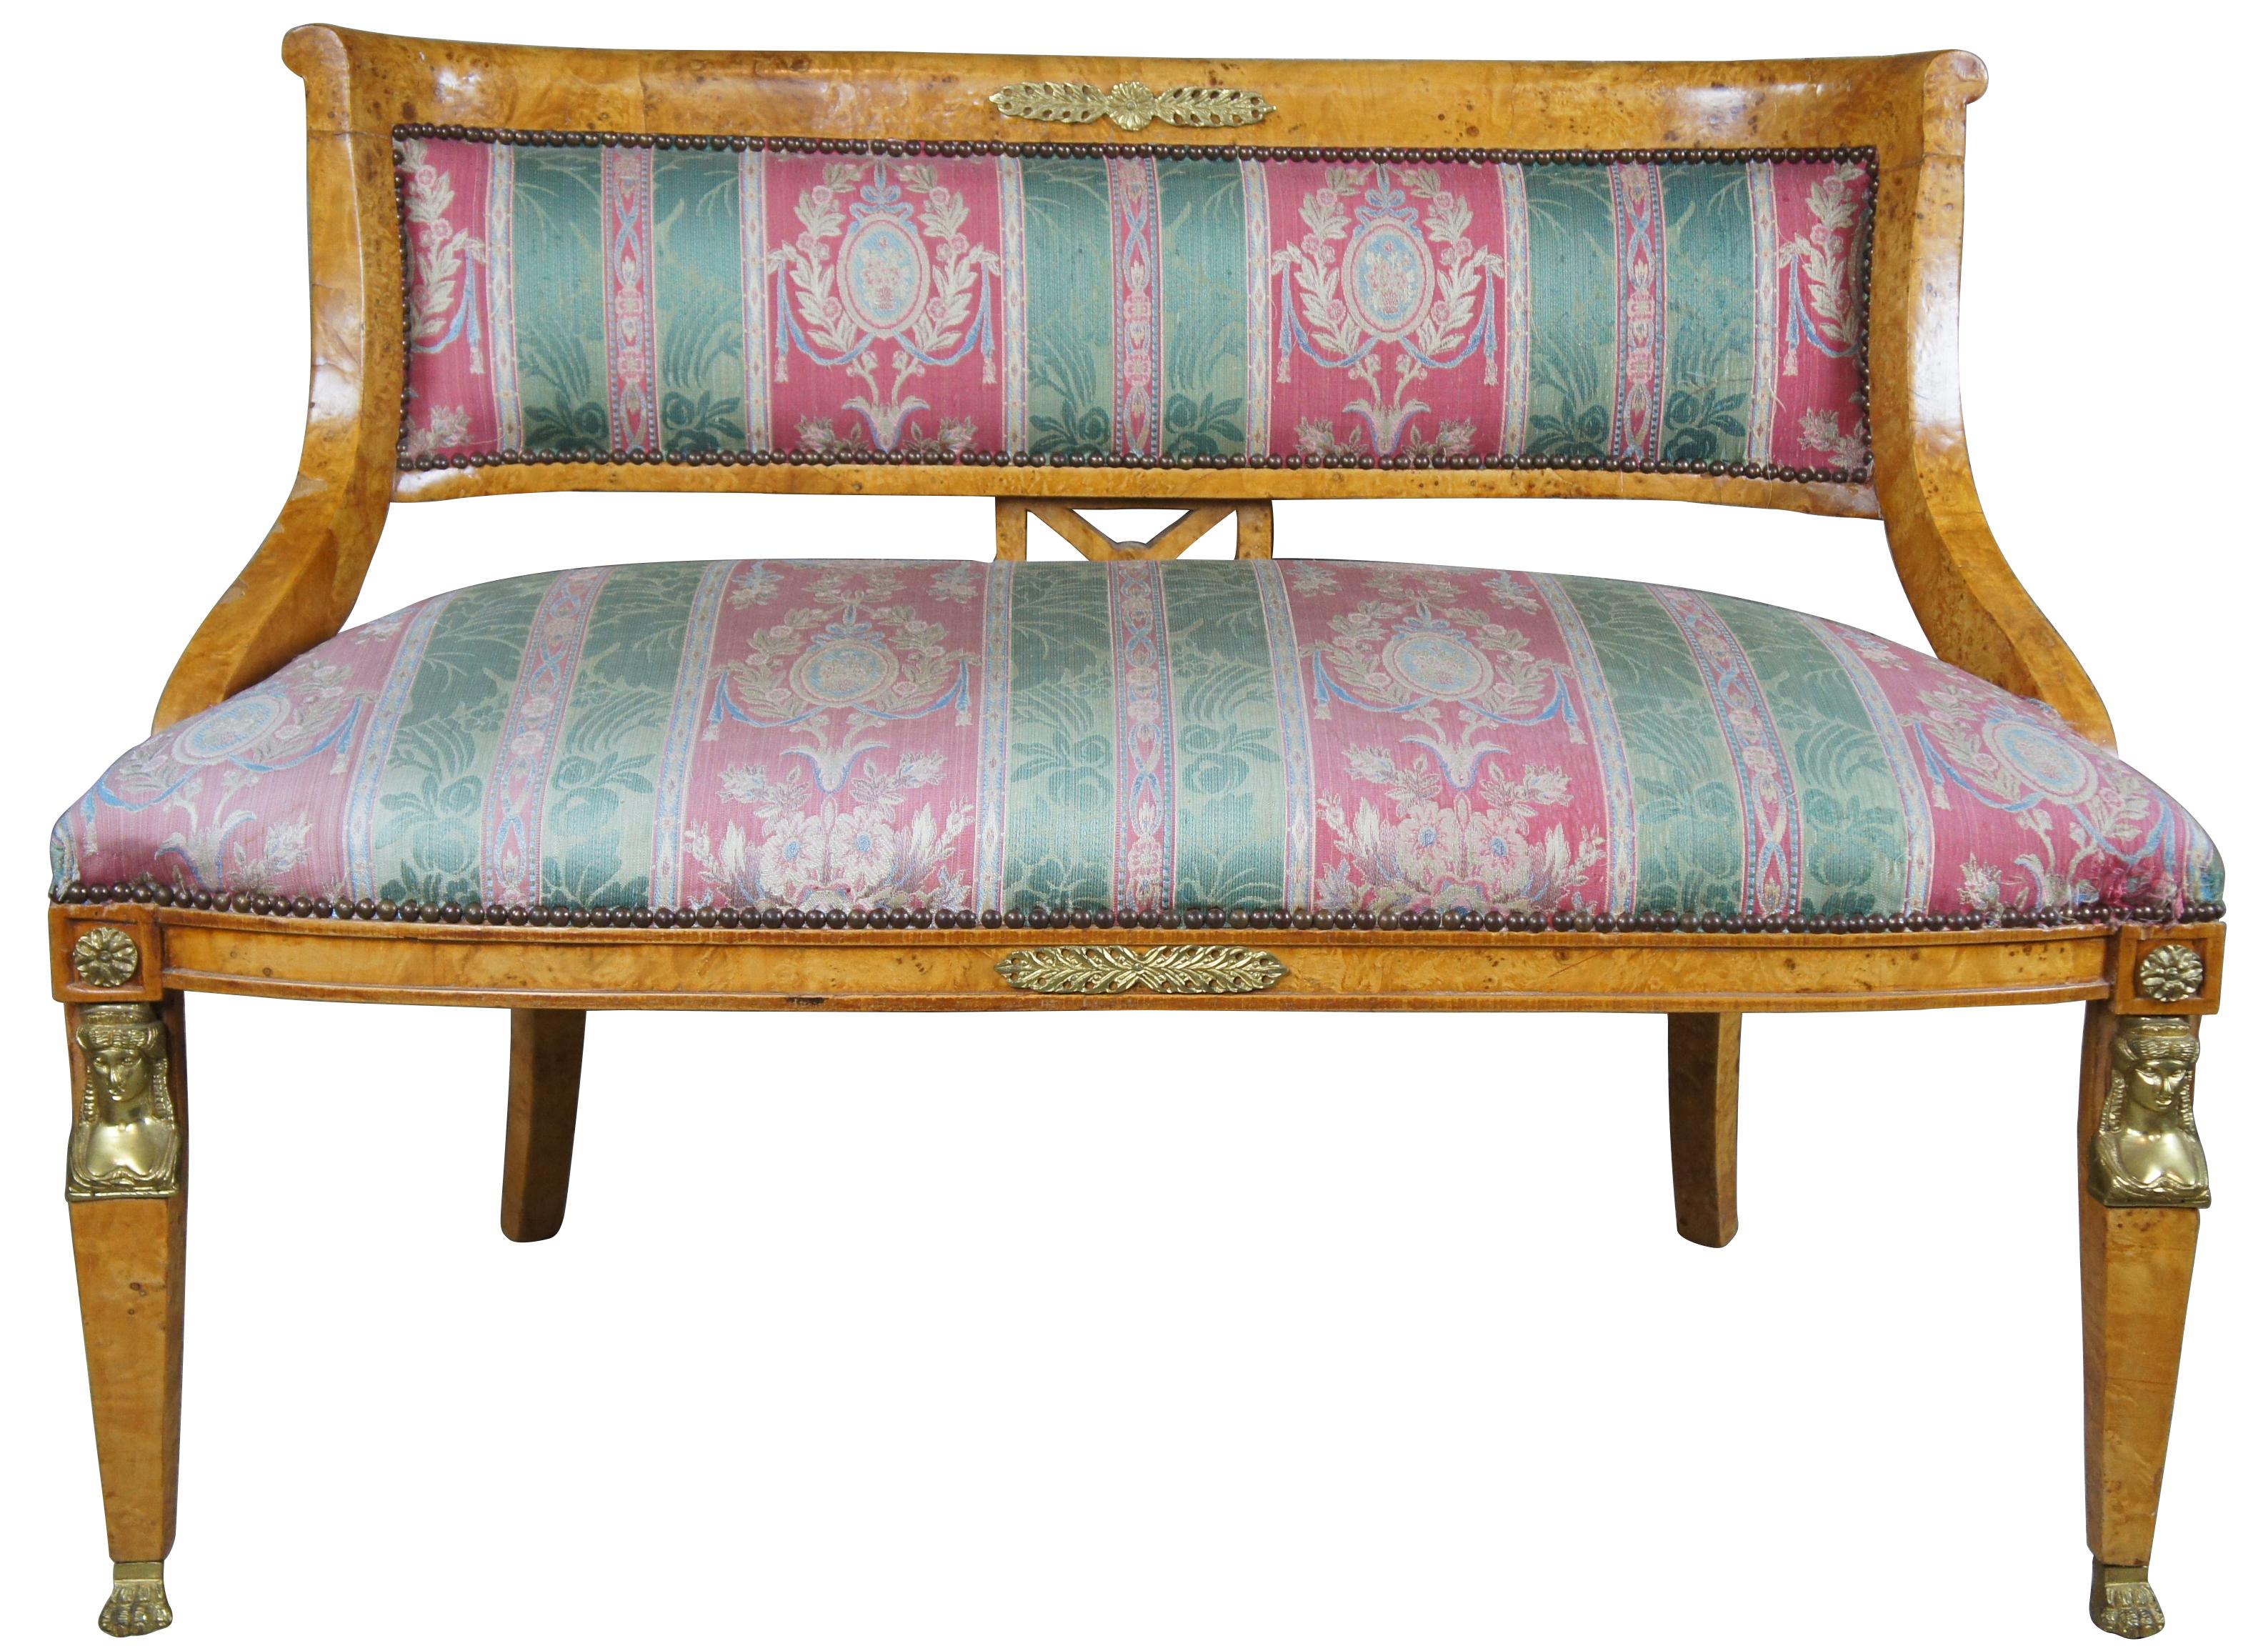 Monumental early 20th century parlor set. A neoclassical and Egyptian revival inspired design. Features a curved rail with unique X-back between contoured arms leading to regal striped upholstery. The chairs are supported by square tapered front